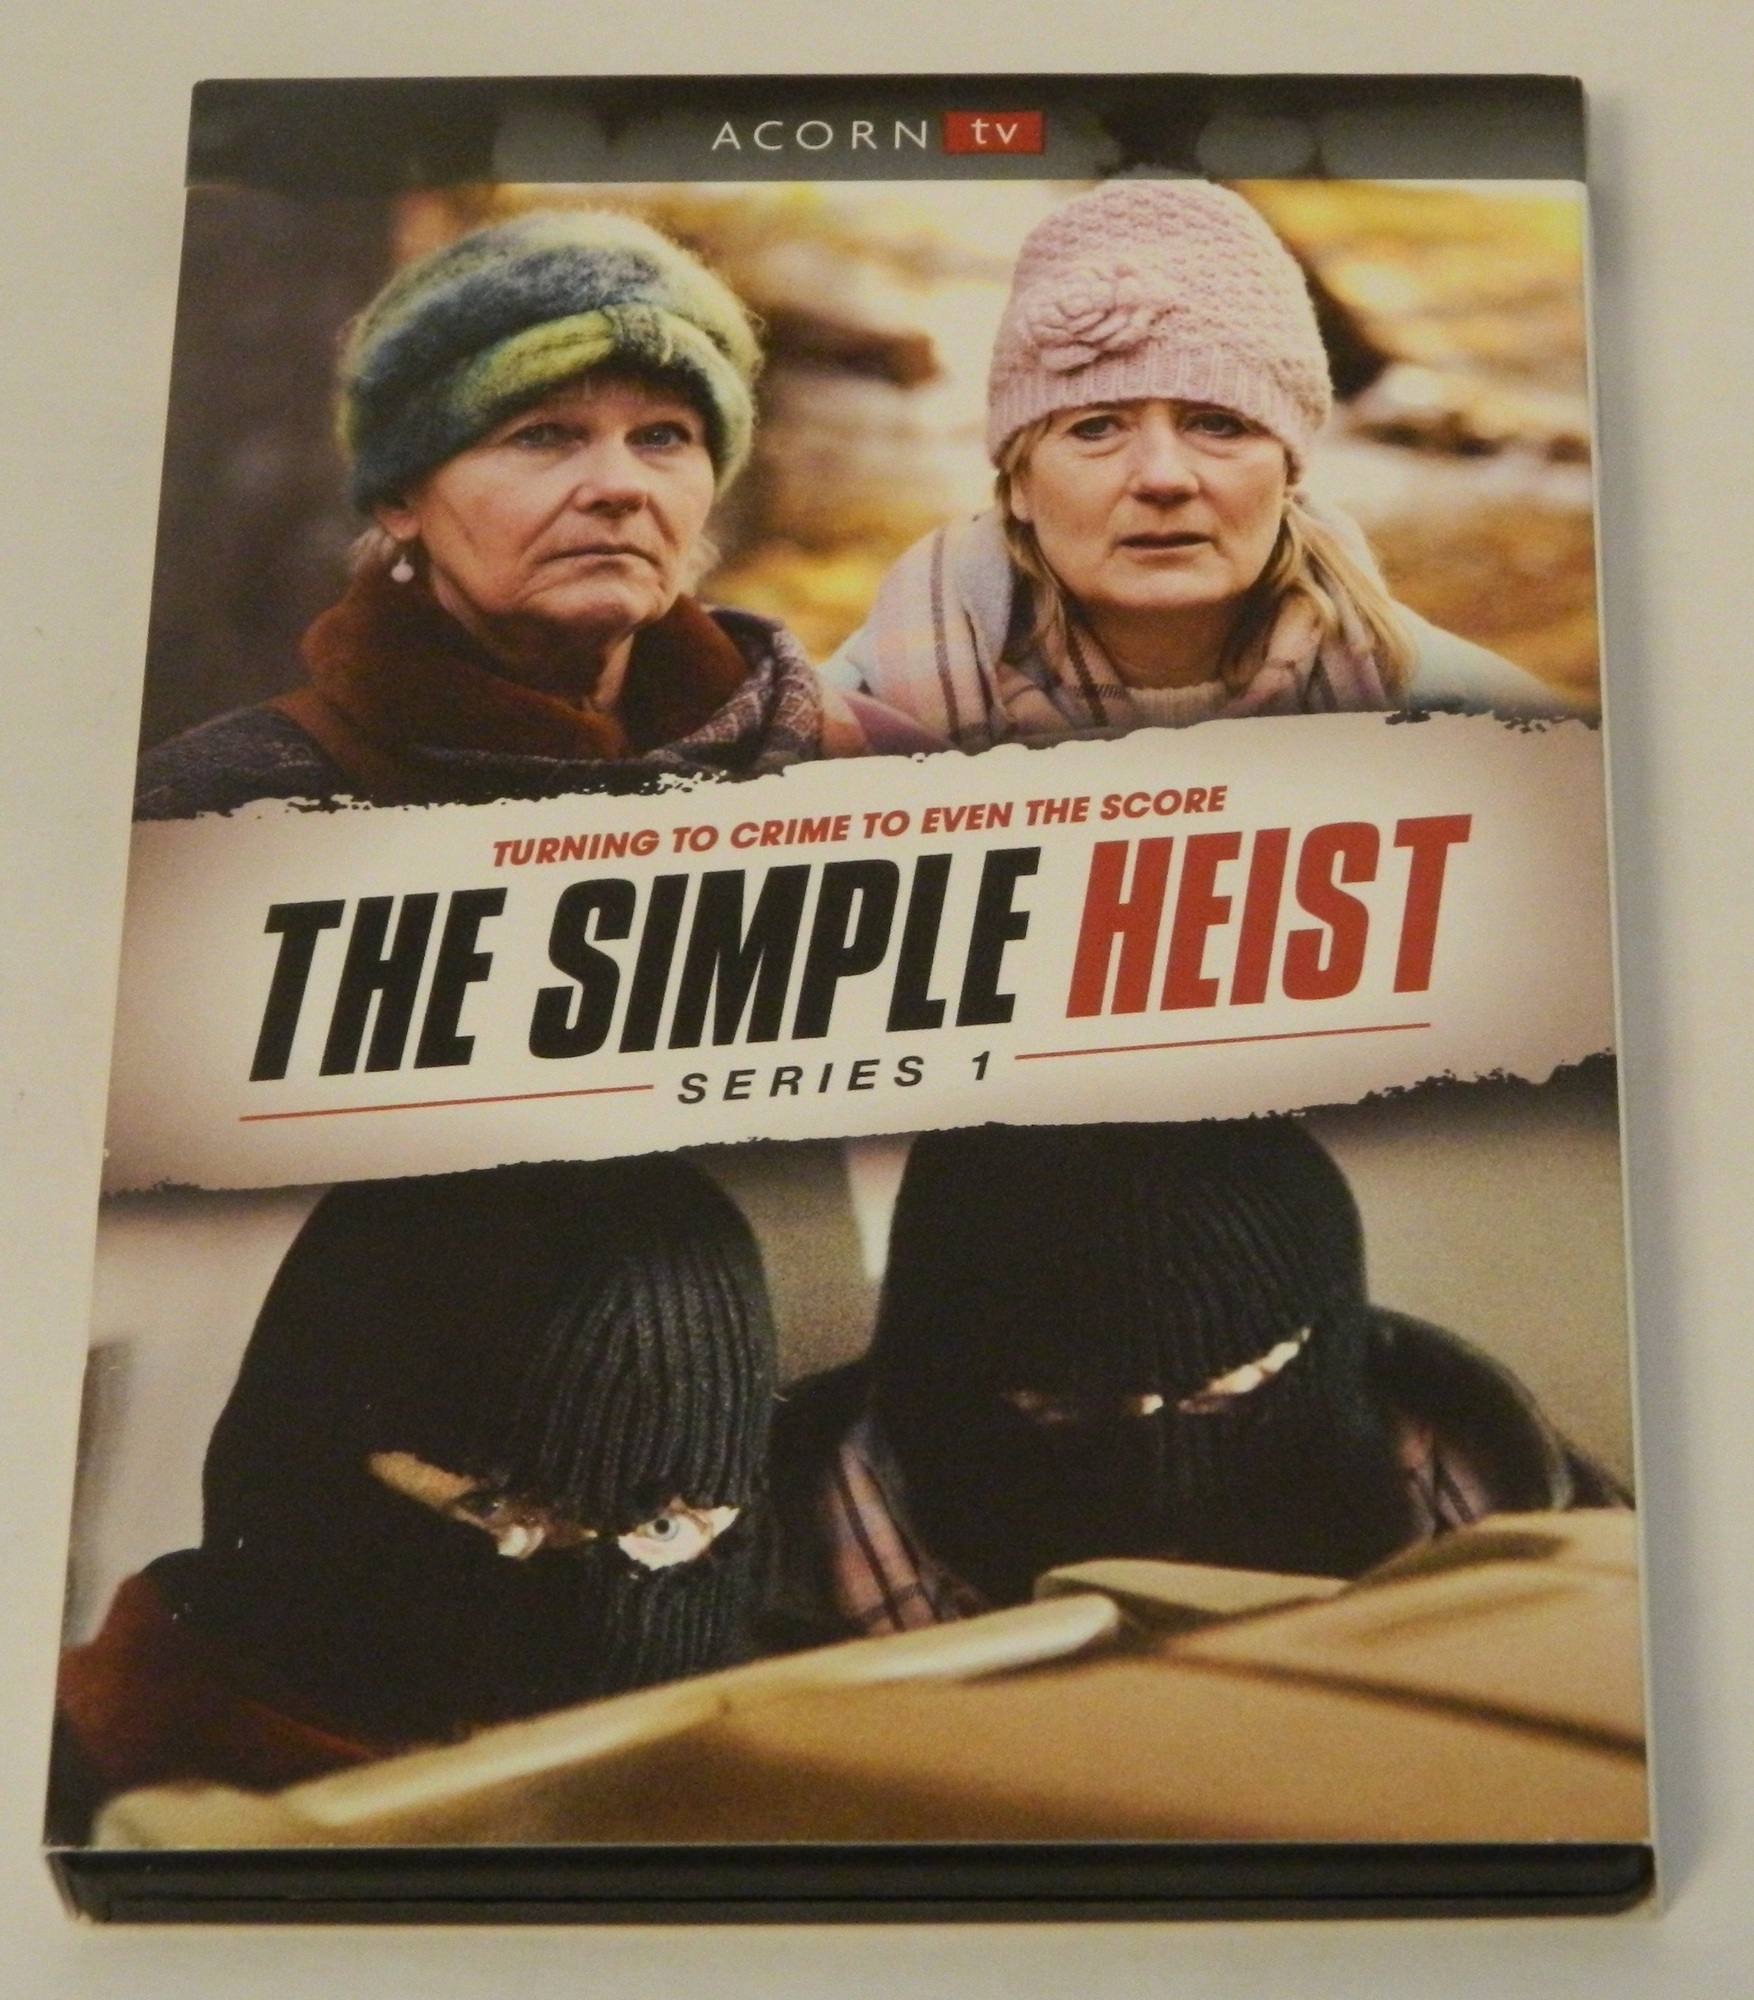 The Simple Heist: Series 1 DVD Review